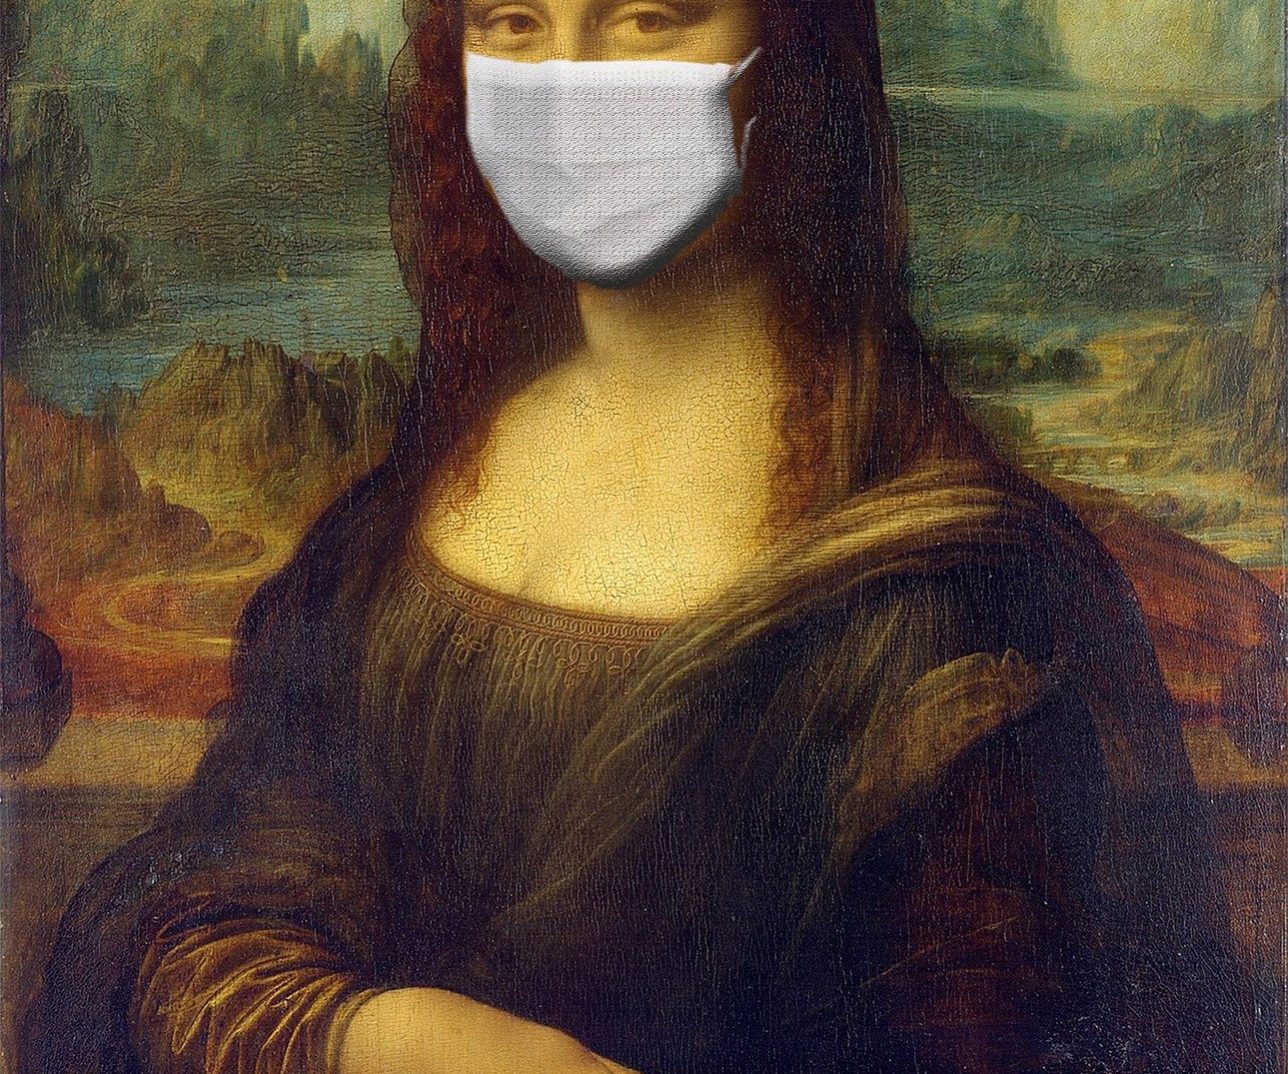 Mona Lisa with face mask